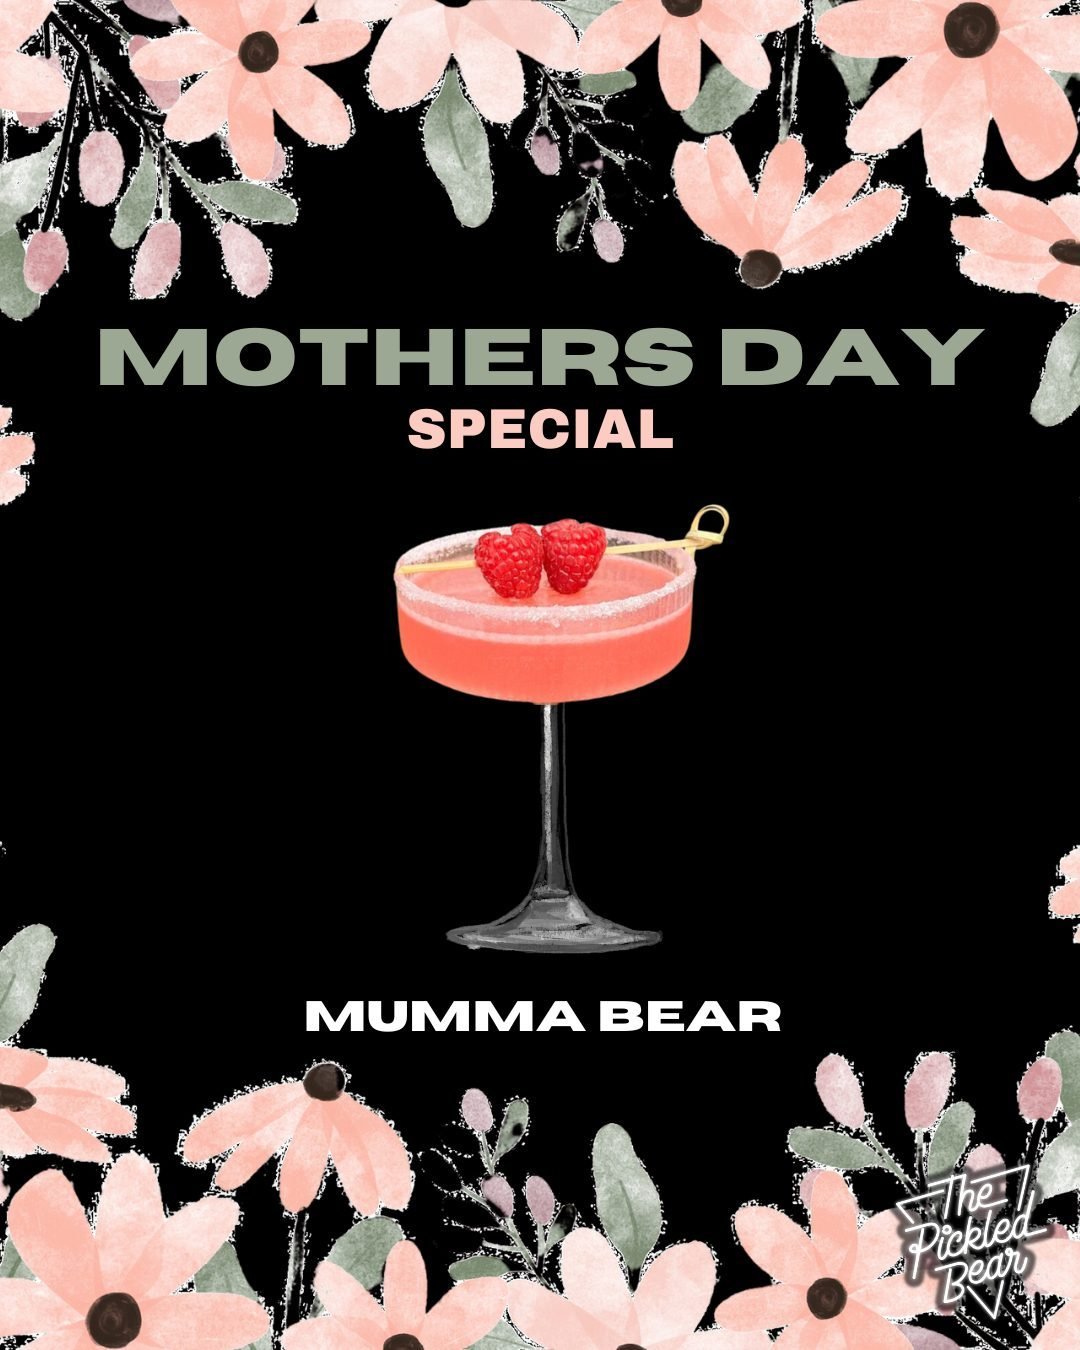 MOTHERS DAY SPECIAL ❤️🍸✨

Book a table for you and your mum ▶️ Link in Bio

🔥🔥🔥 Mum's will receive one FREE Mumma Bear Cocktail on arrival...
Just screenshot this post and show to the bar staff ✨